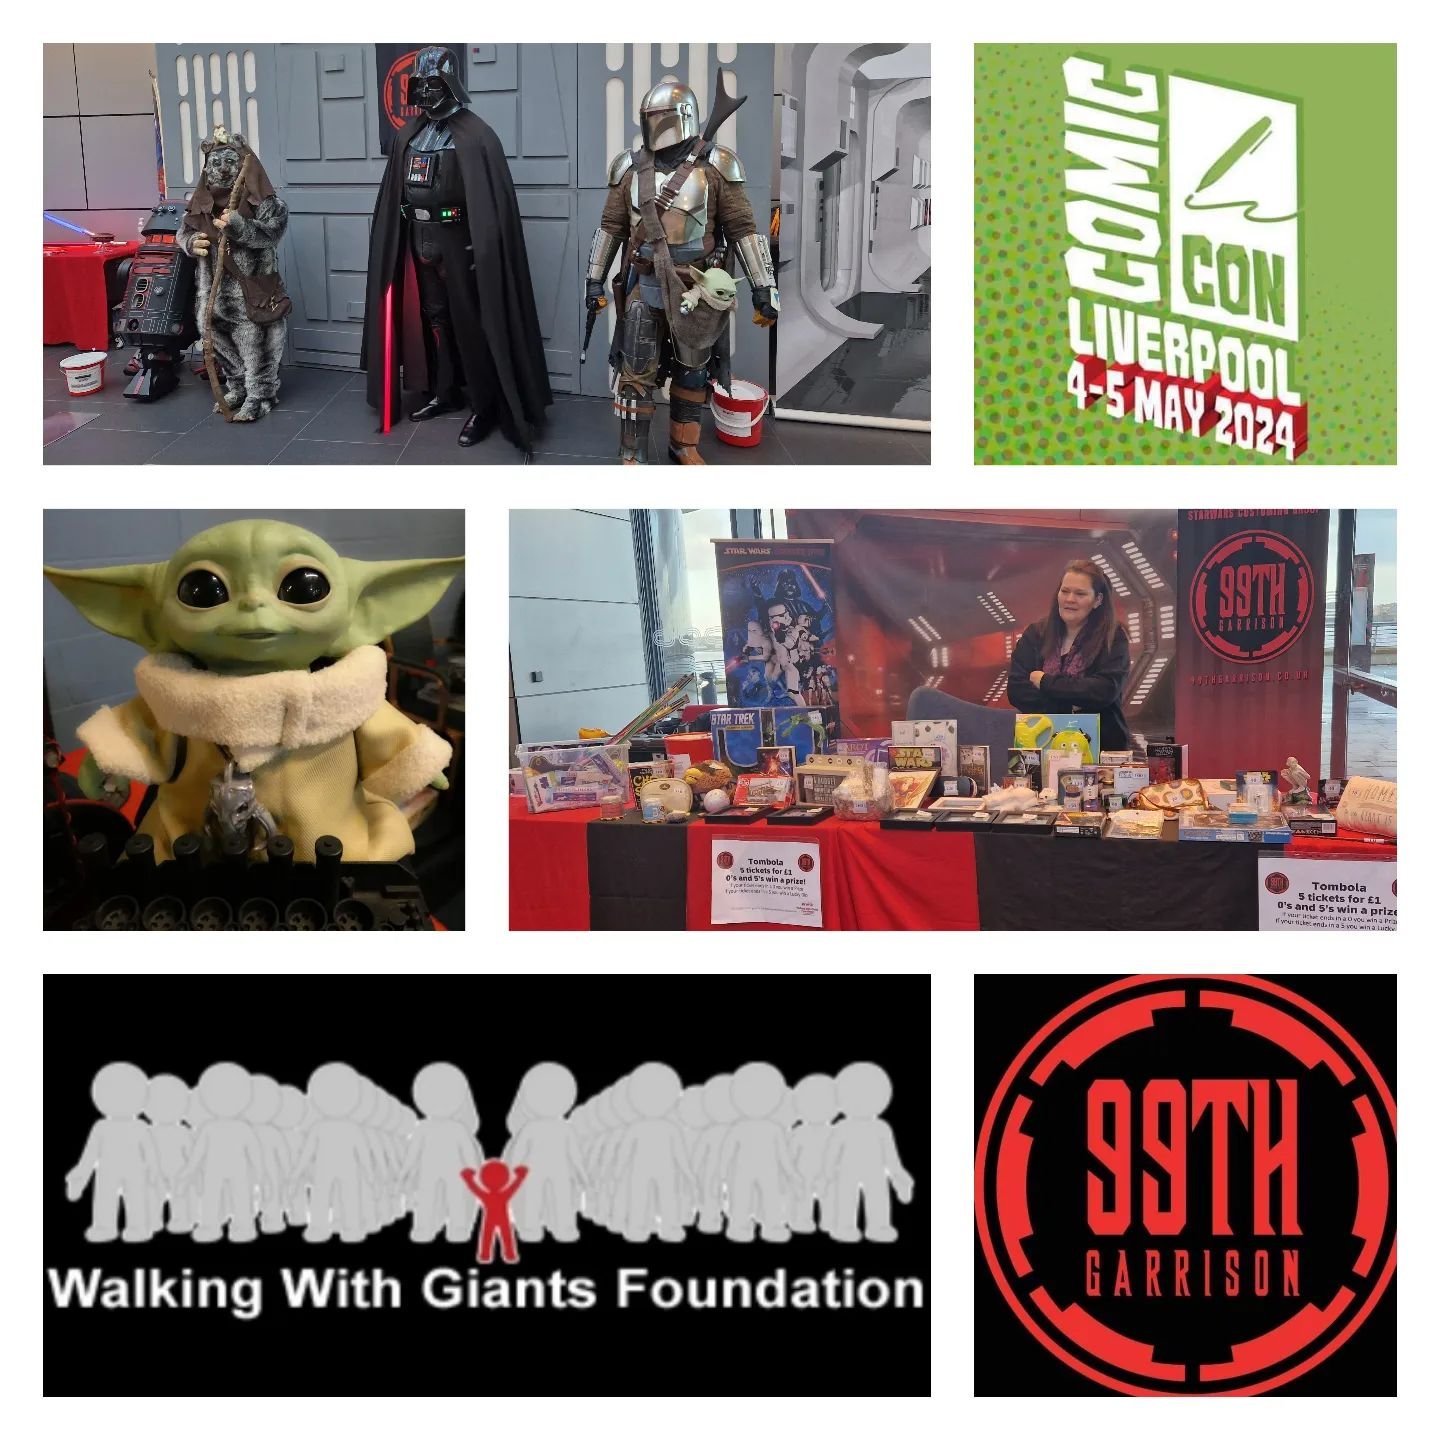 This weekend we will also be out on patrol at @comicconlpool keeping you all safe from Rebel scum and taking imperial credits for @walkingwithgiantsfoundation_  We will be bringing our death Star Wall, borrow a saber for a donation and grab an epic p